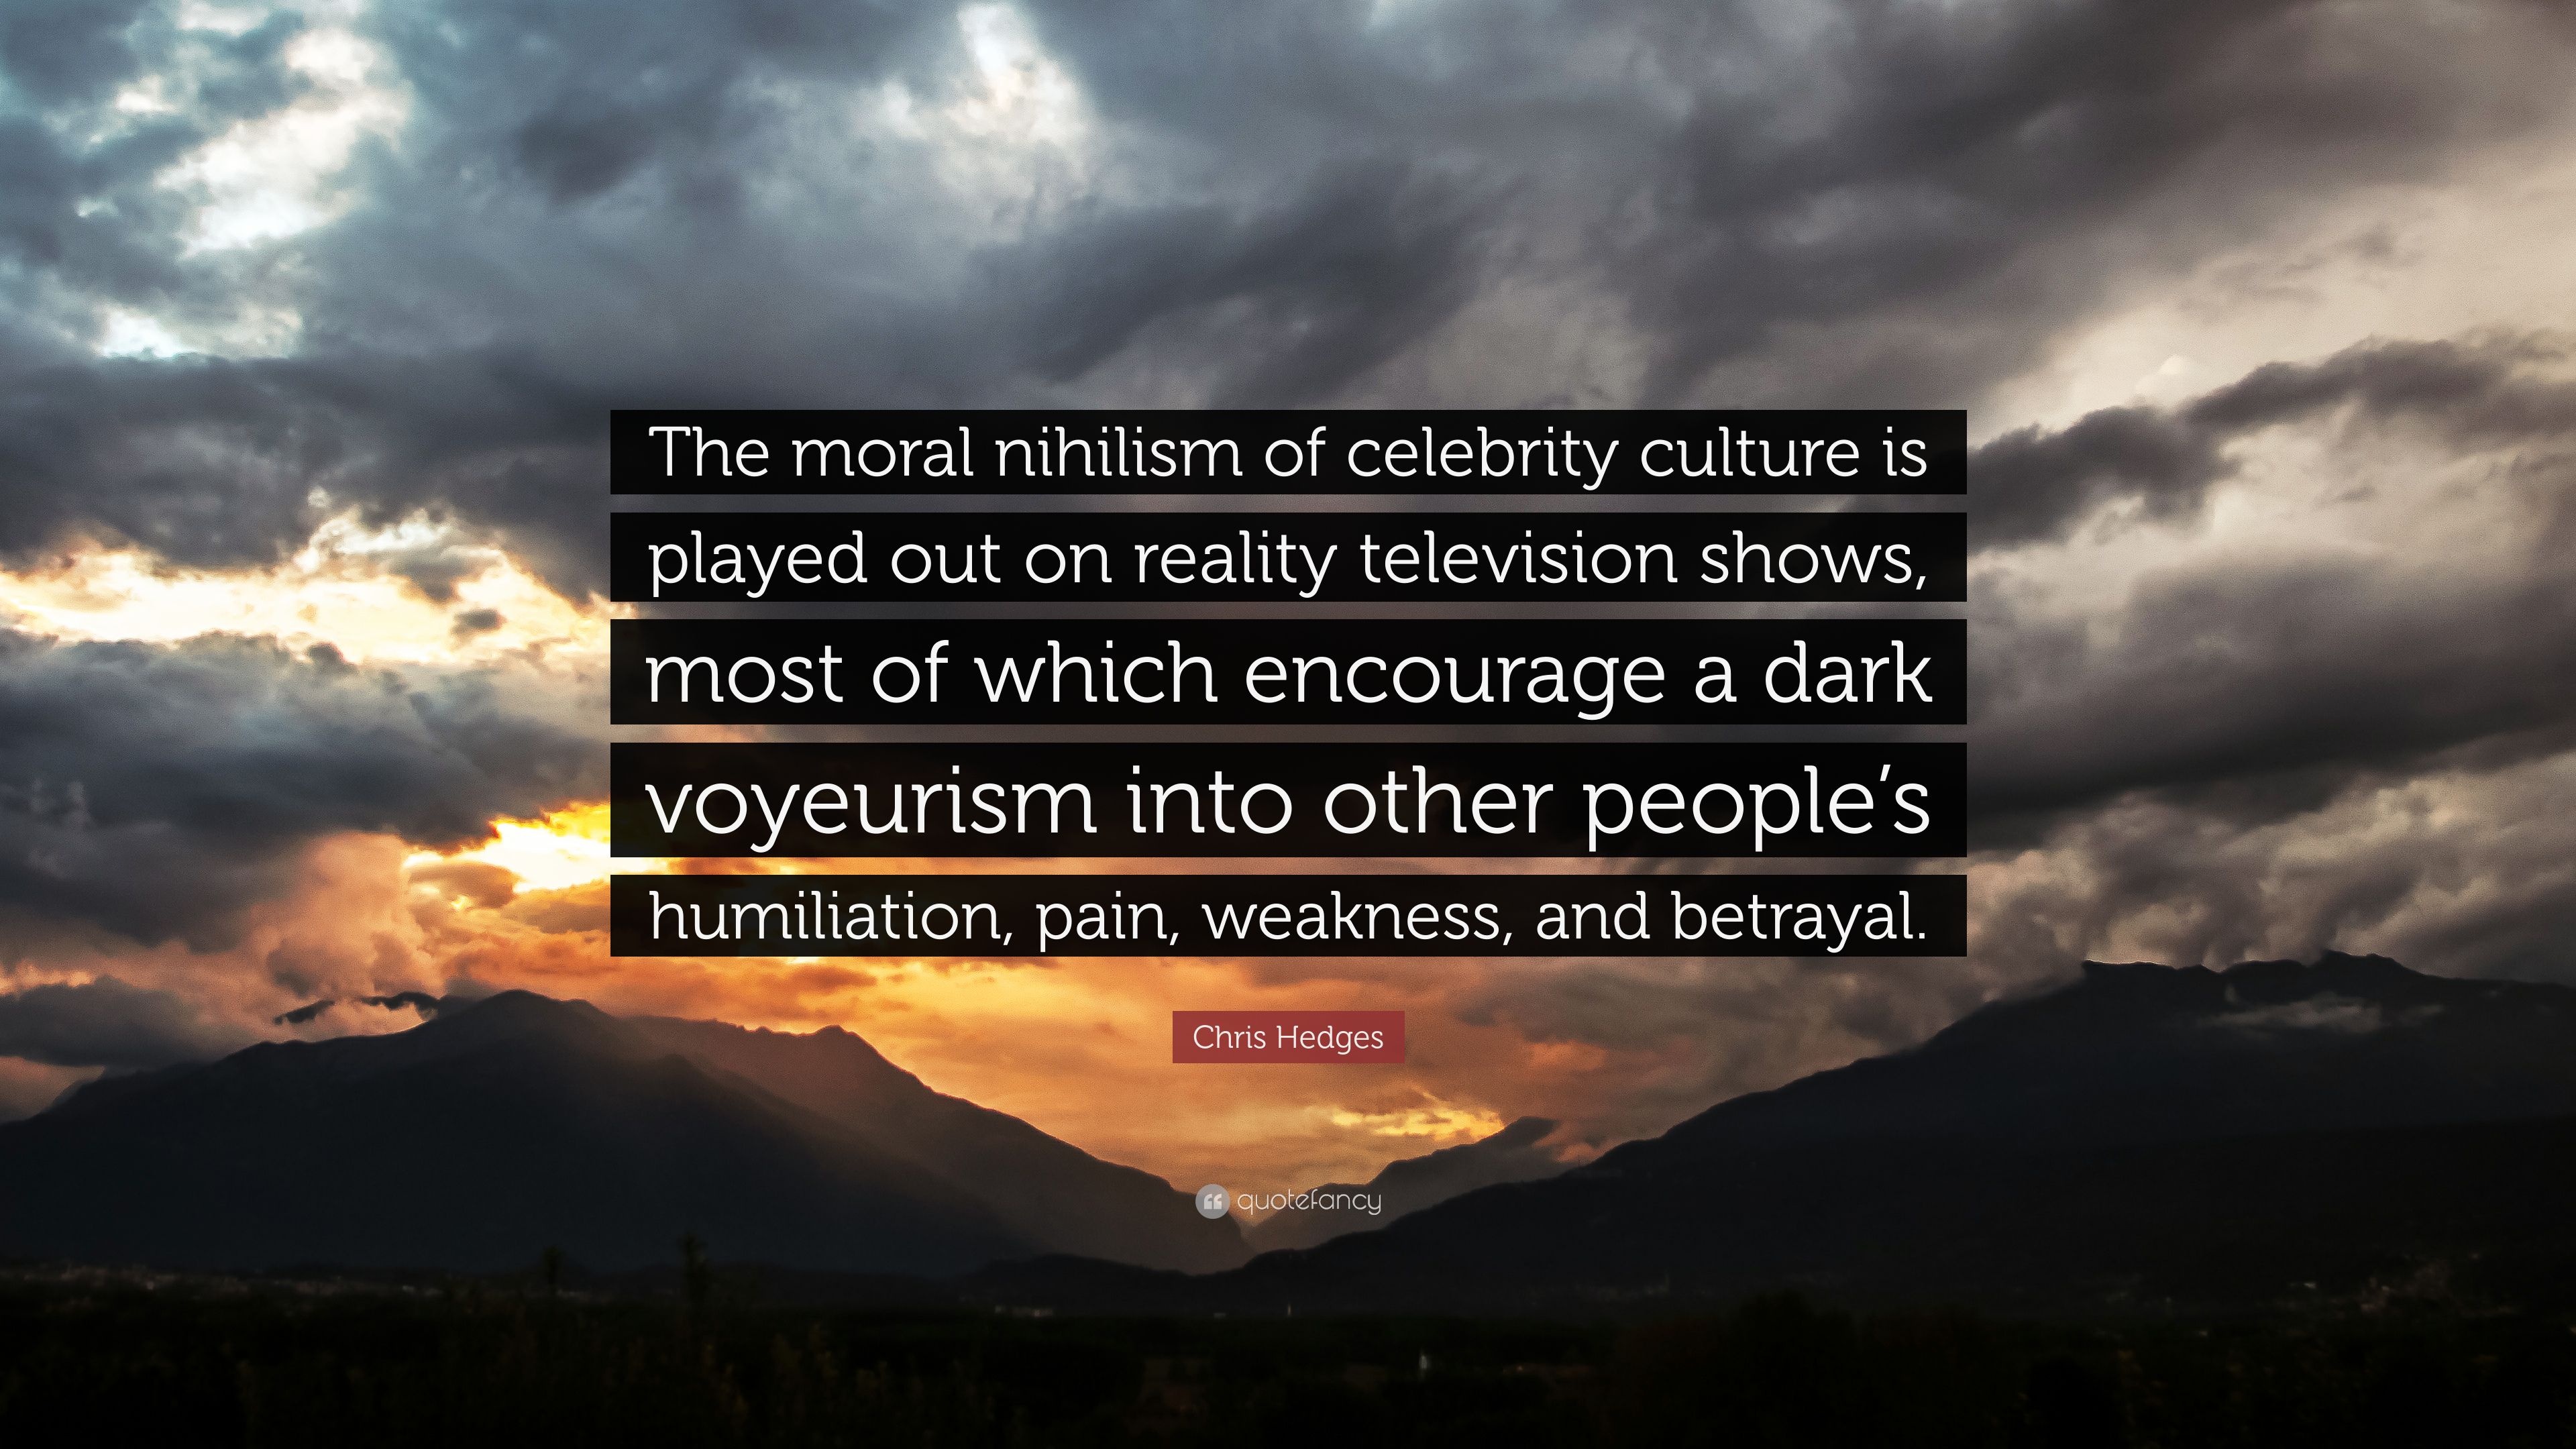 Chris Hedges Quote: “The moral nihilism of celebrity culture is played out on reality television shows, most of which encourage a dark voyeur.” (7 wallpaper)